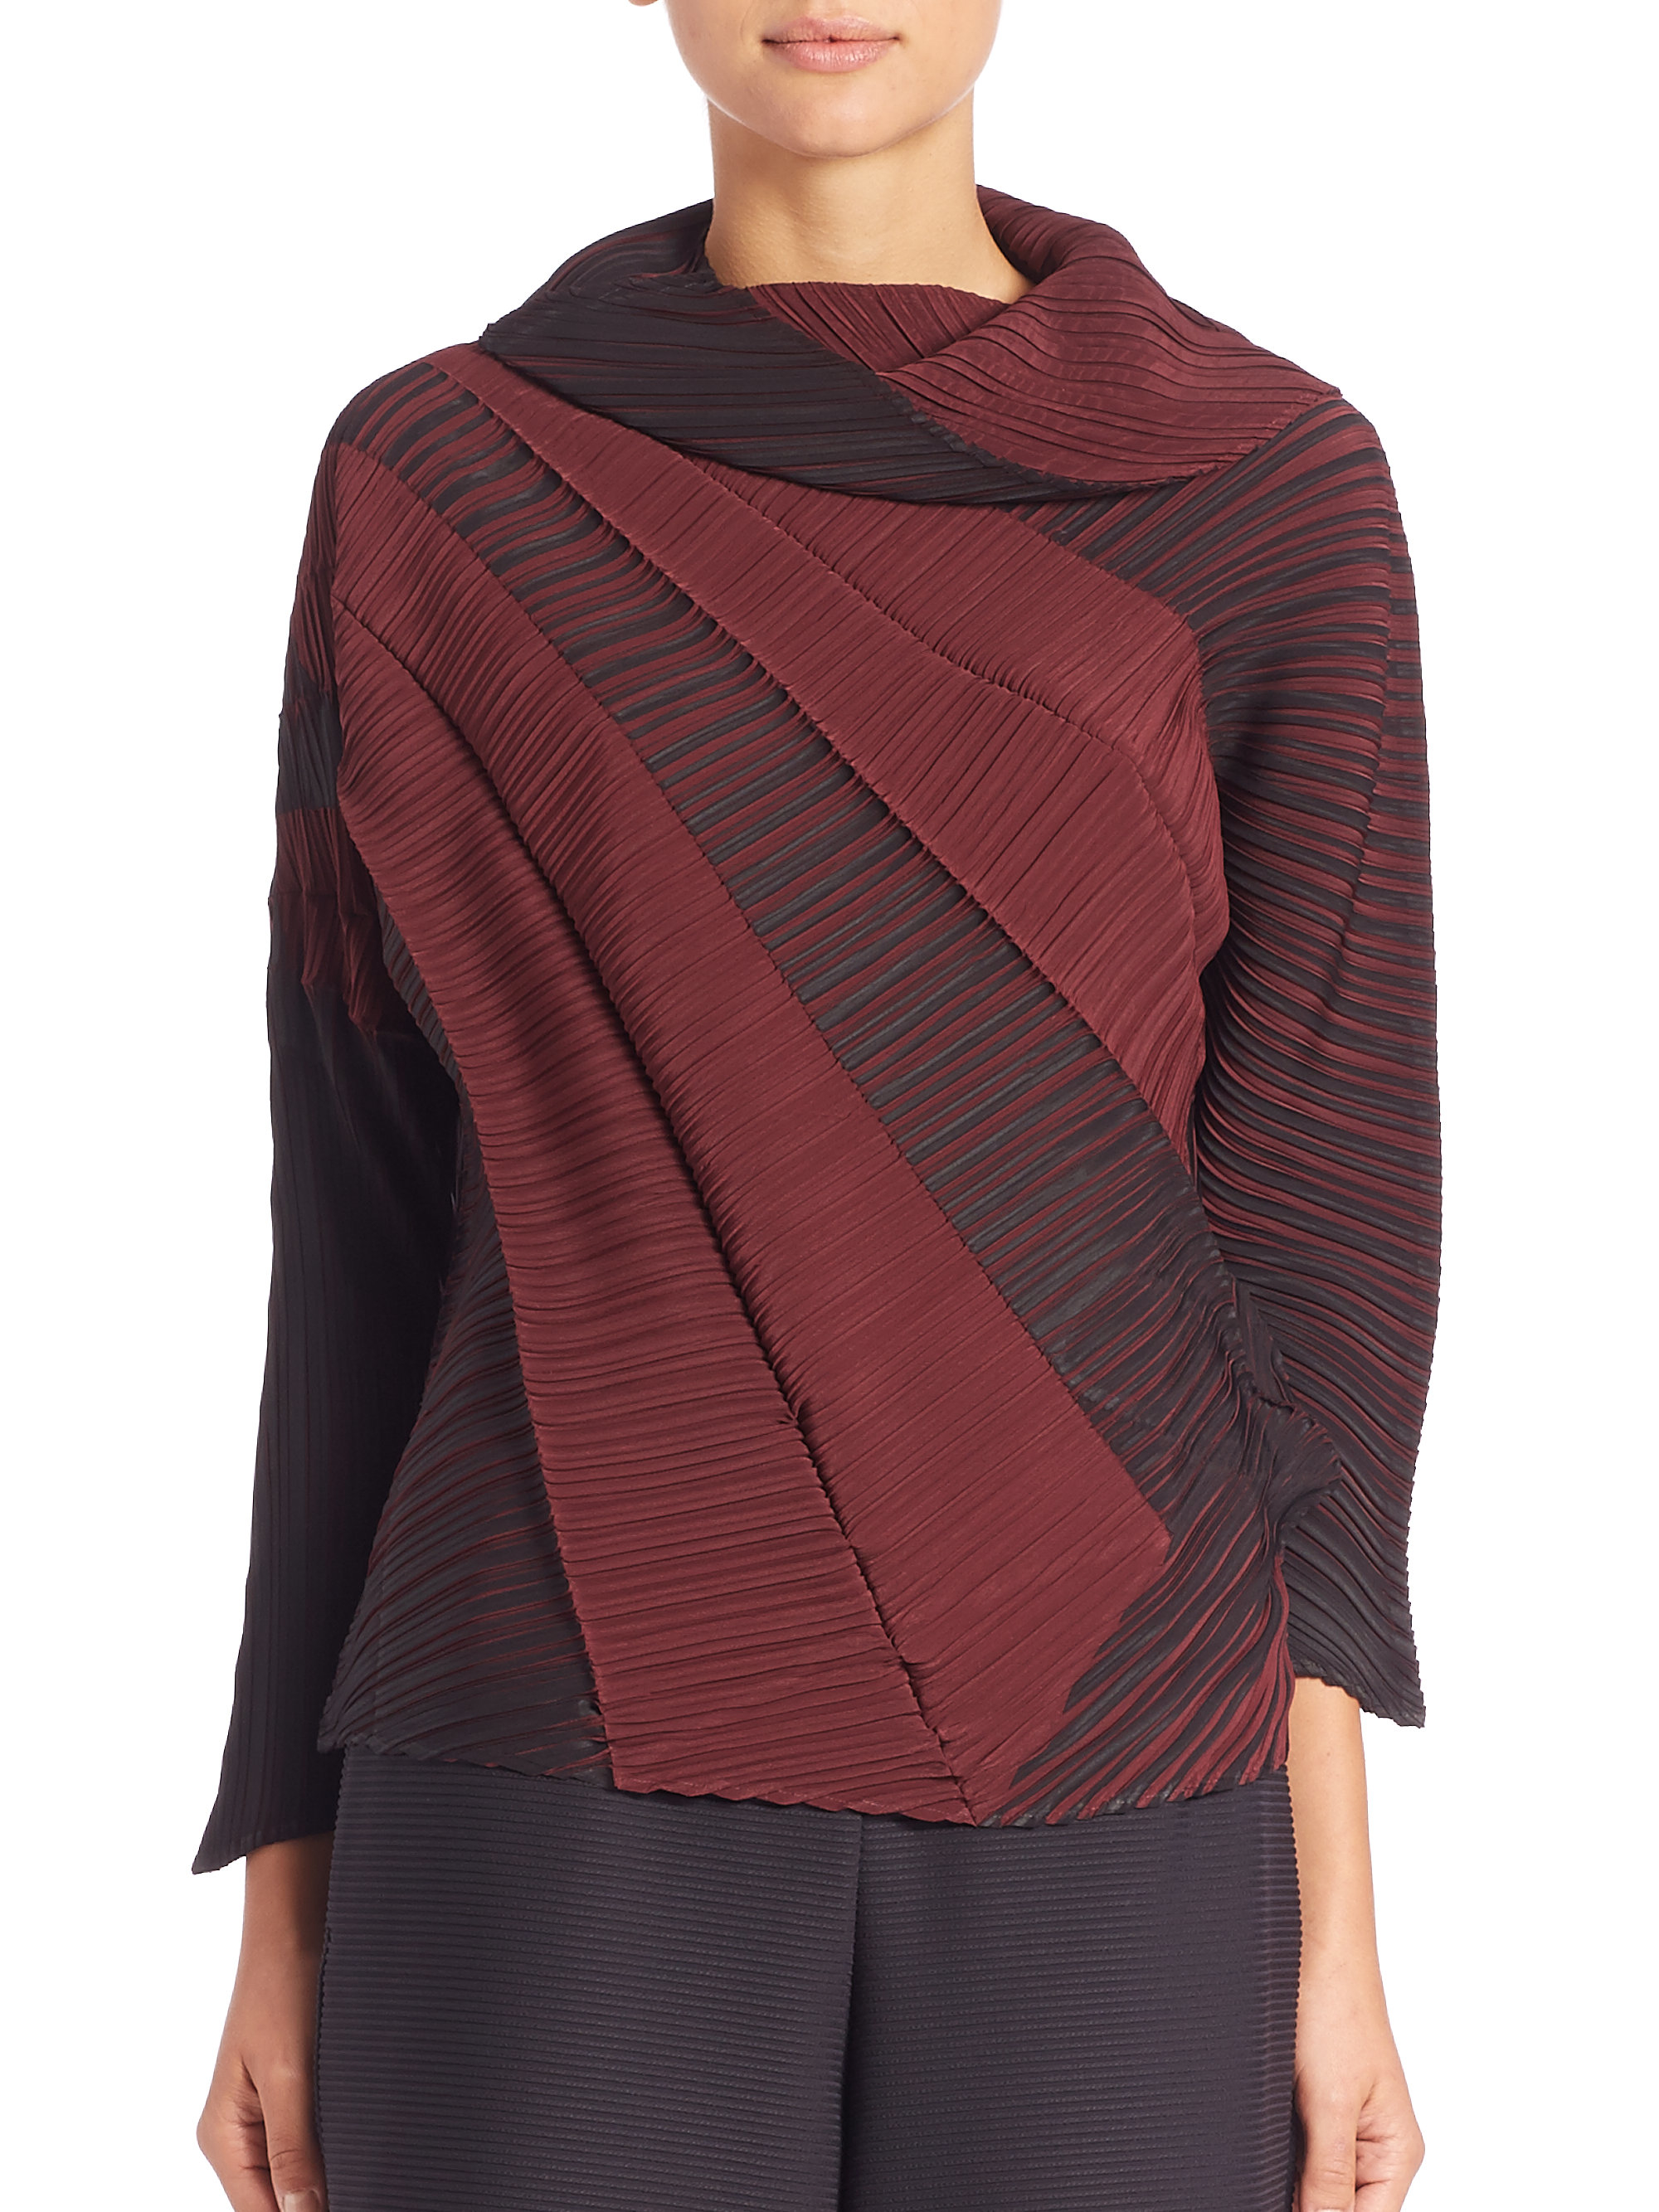 Issey miyake Swell Pleated Top in Red | Lyst